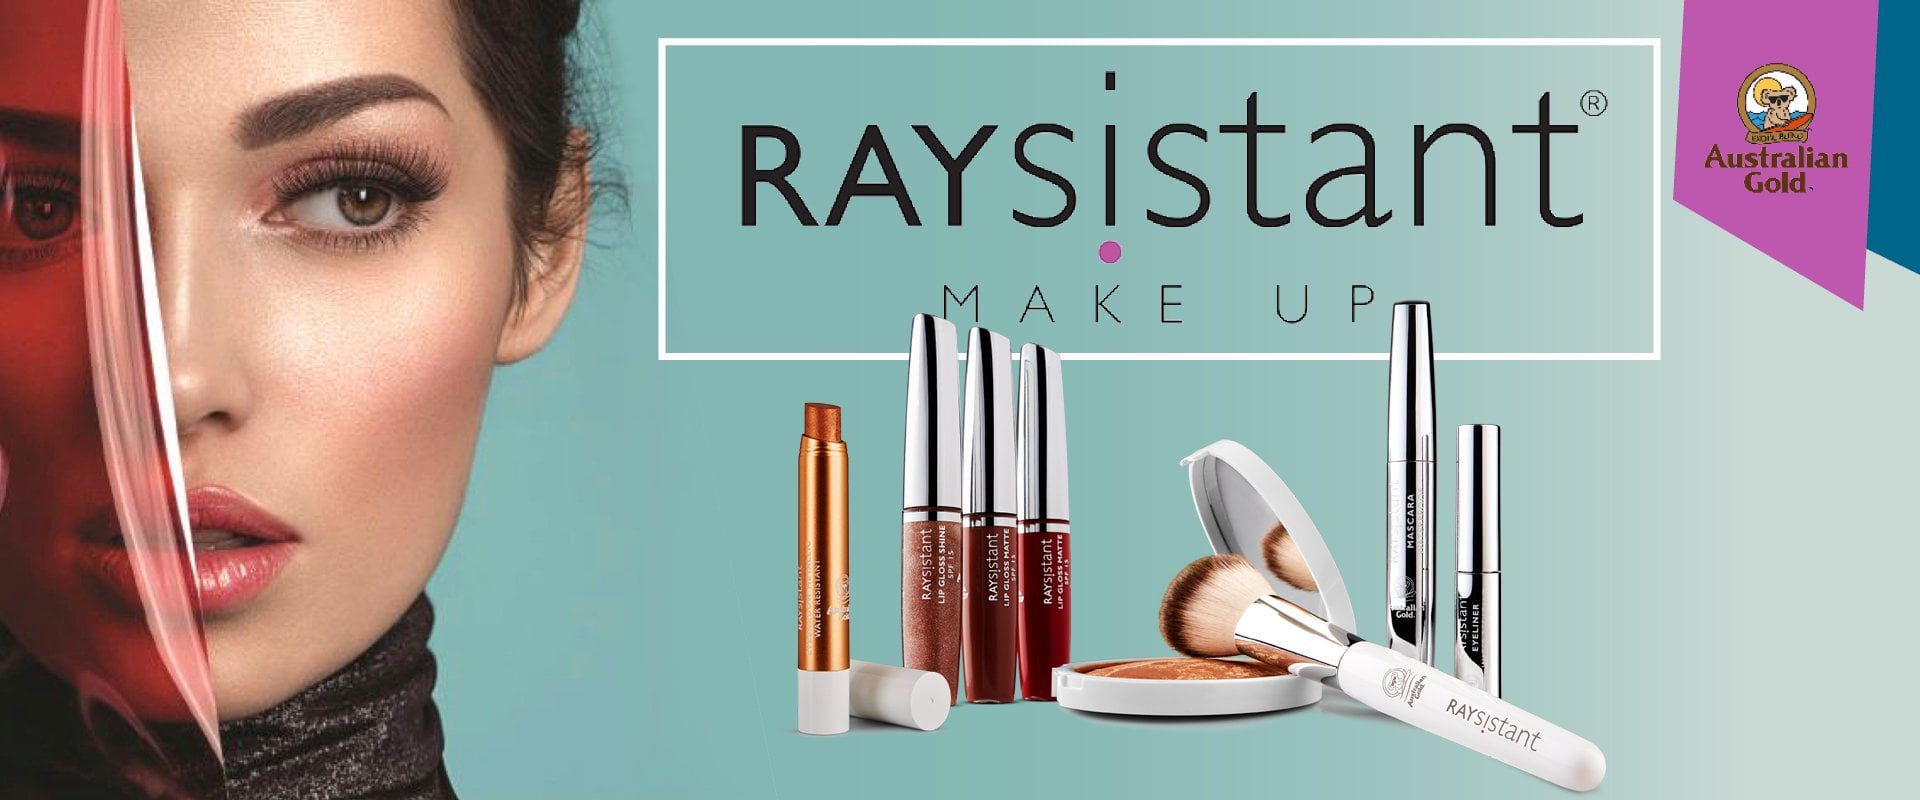 RAYsistant Make-up